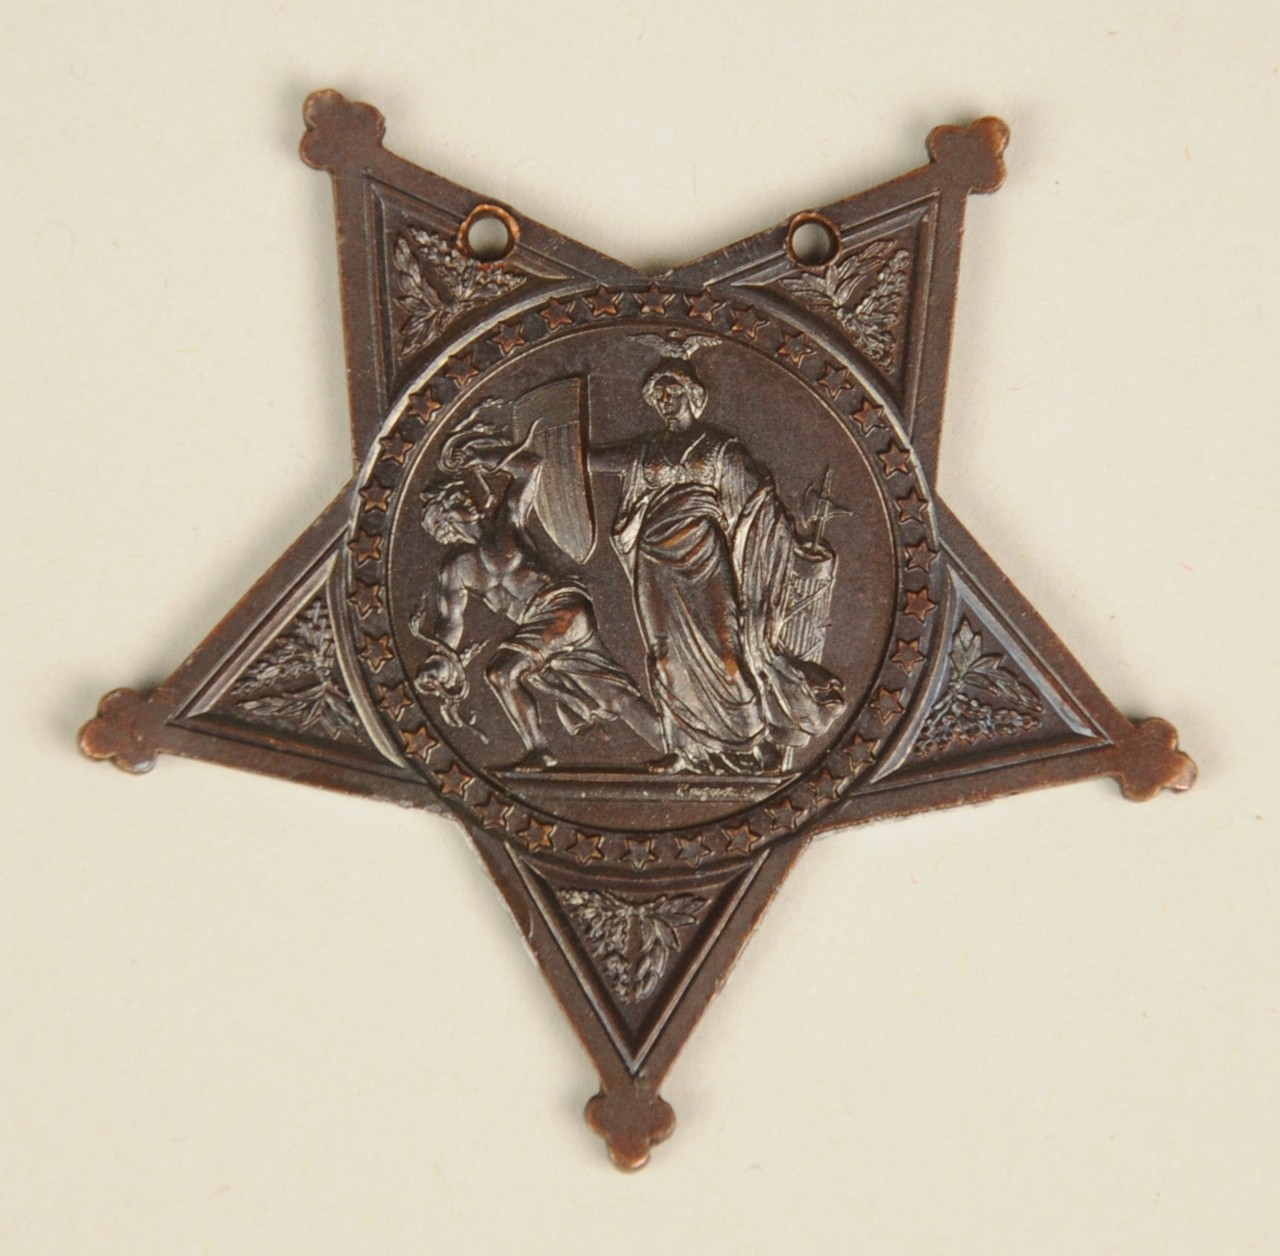 union navy medal of honor civil war